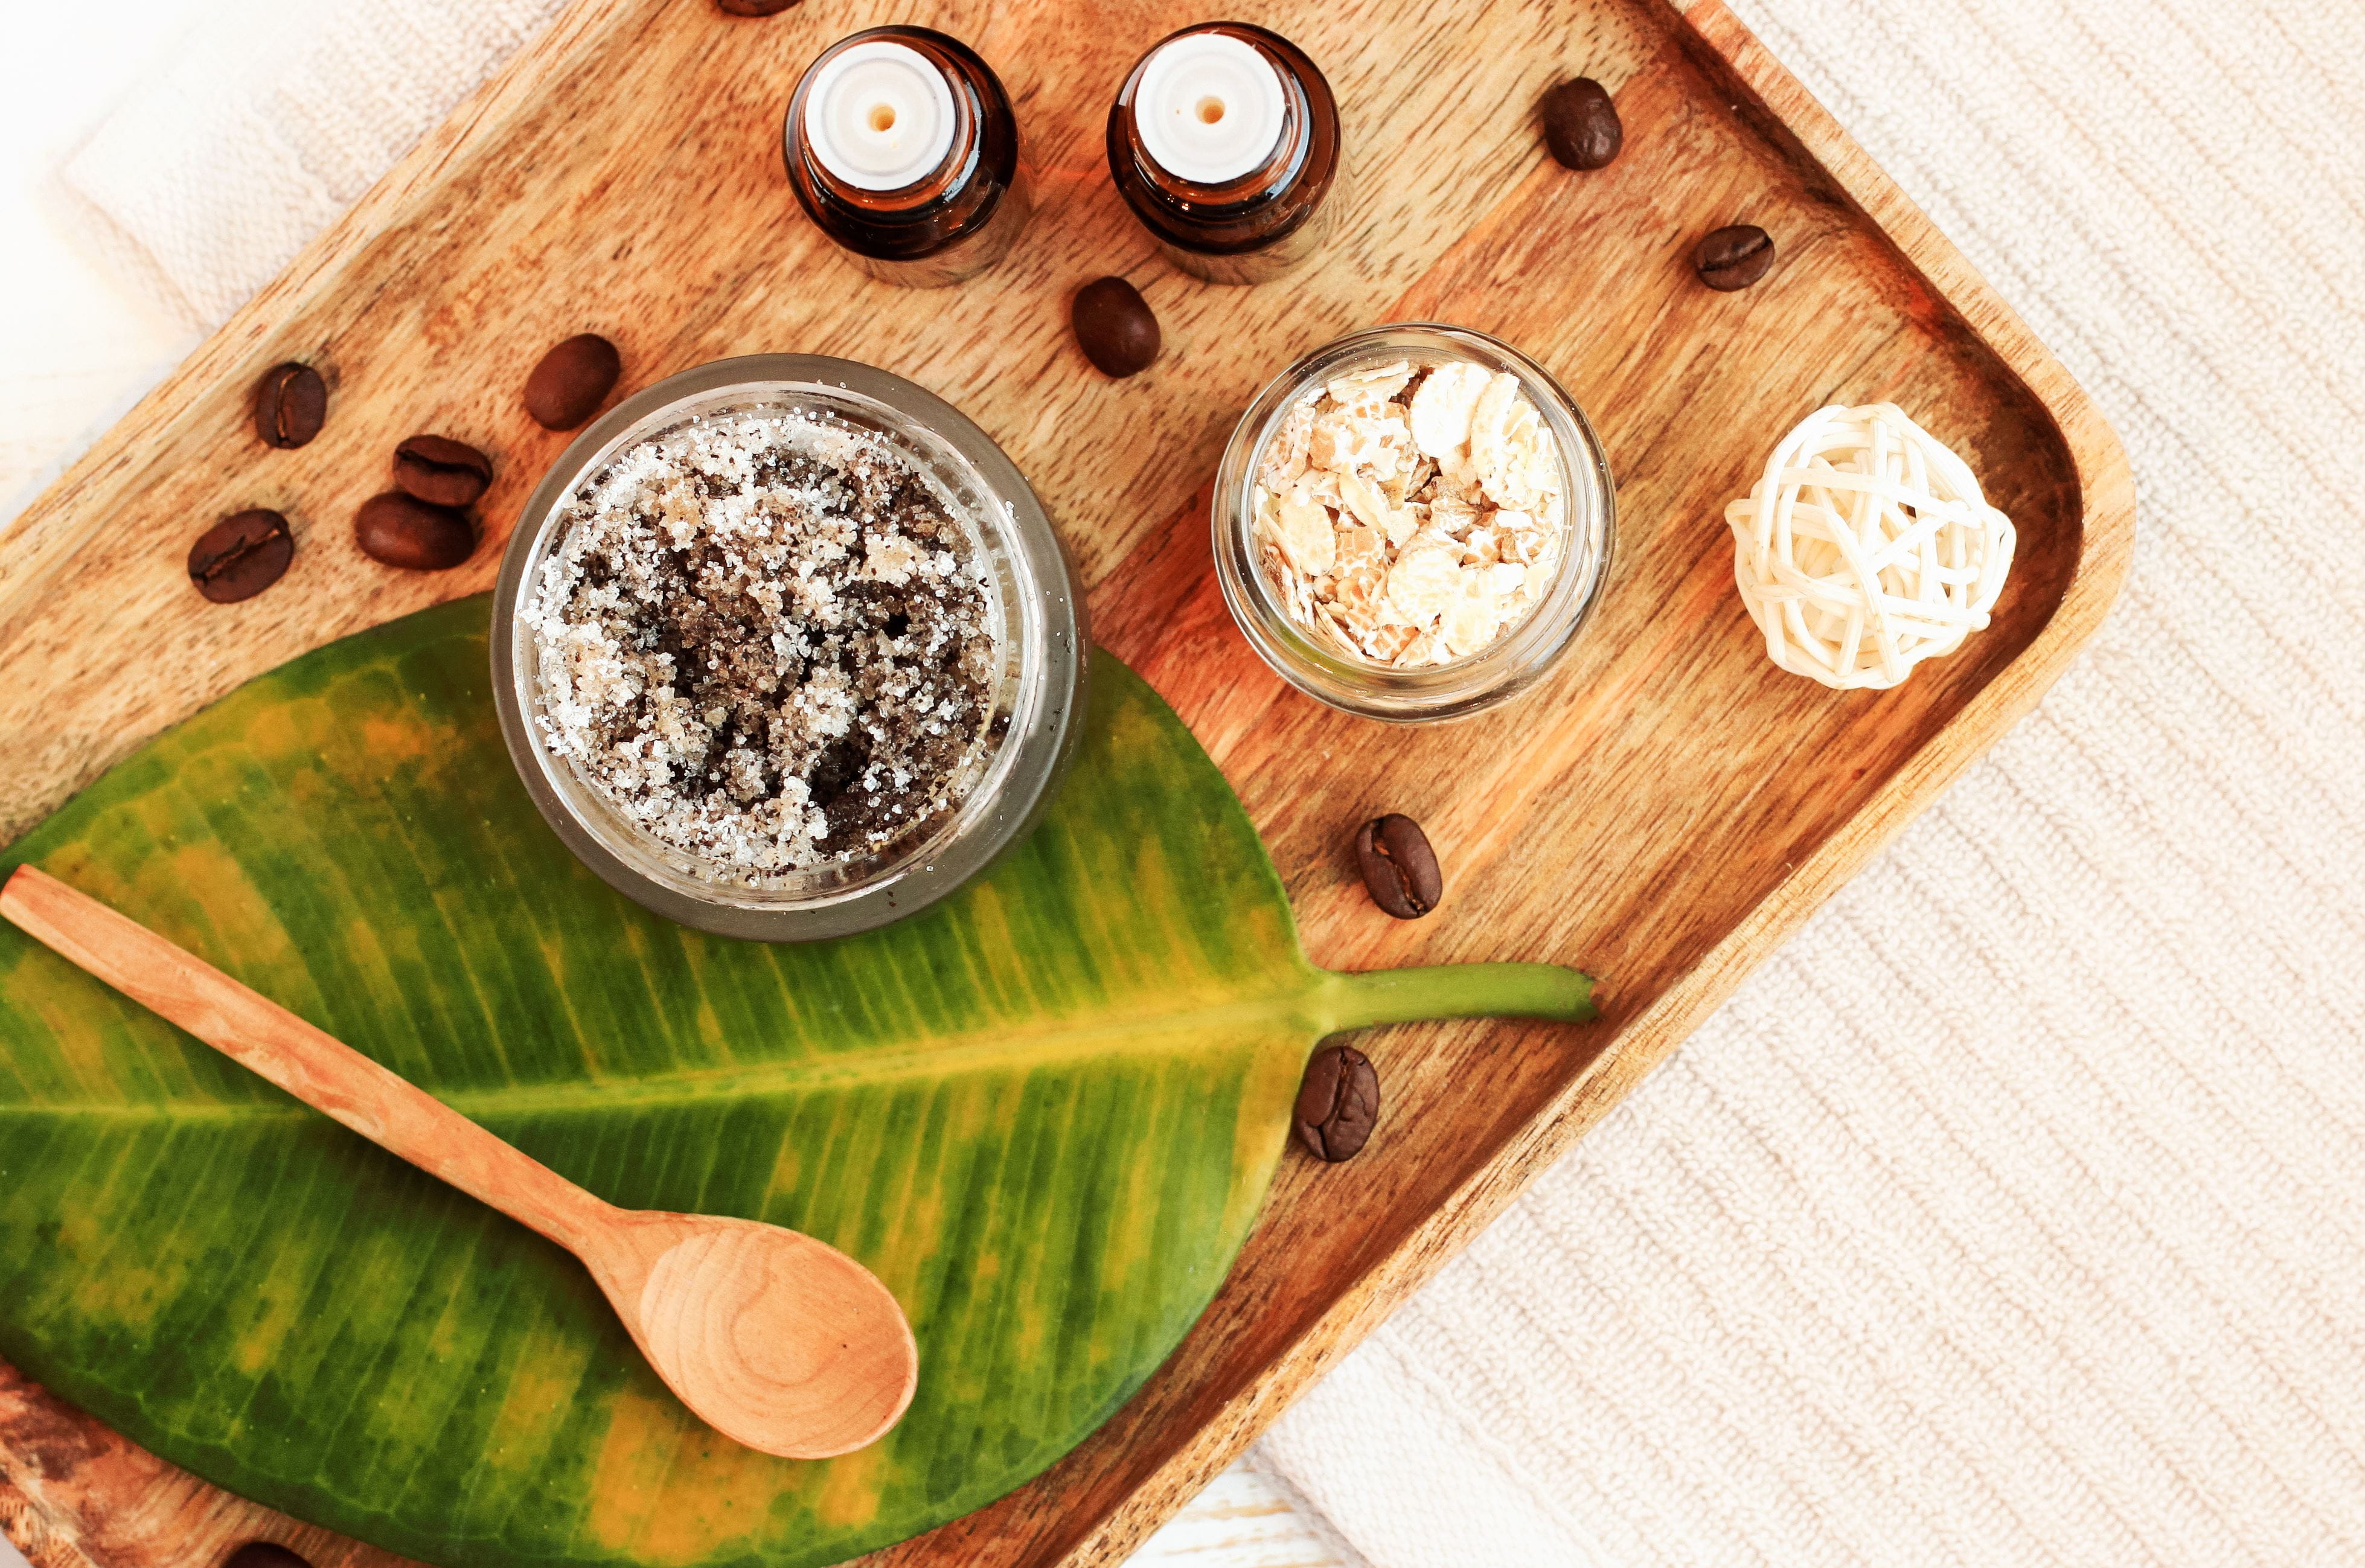 ingredients for a oatmeal, coconut and sugar scrub